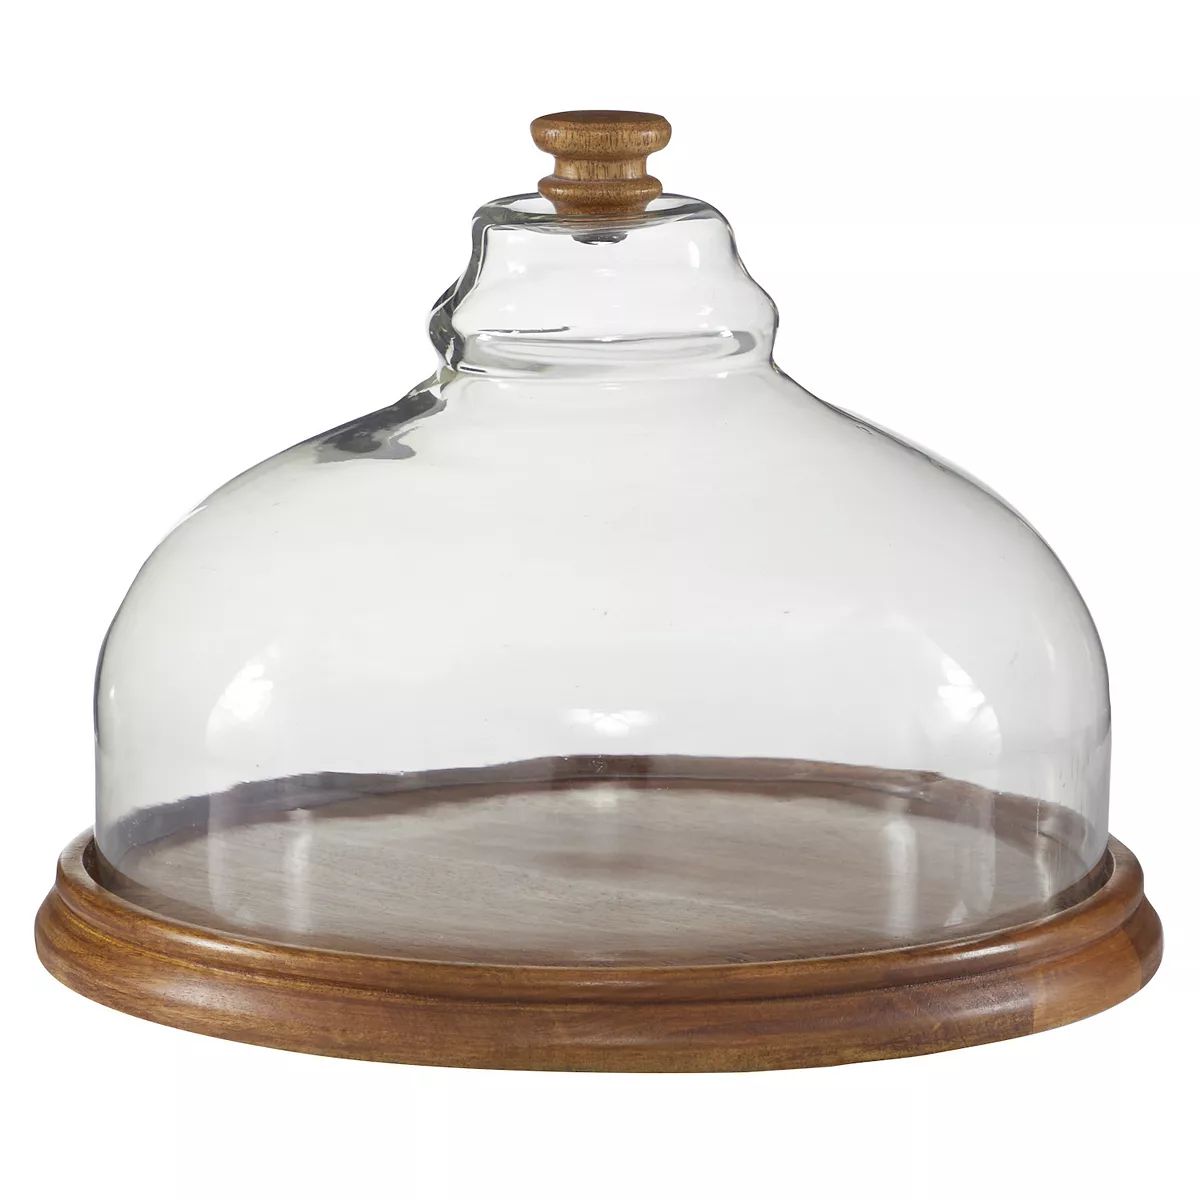 Stella & Eve Natural Wood Plate With Glass Cloche Cover | Kohl's